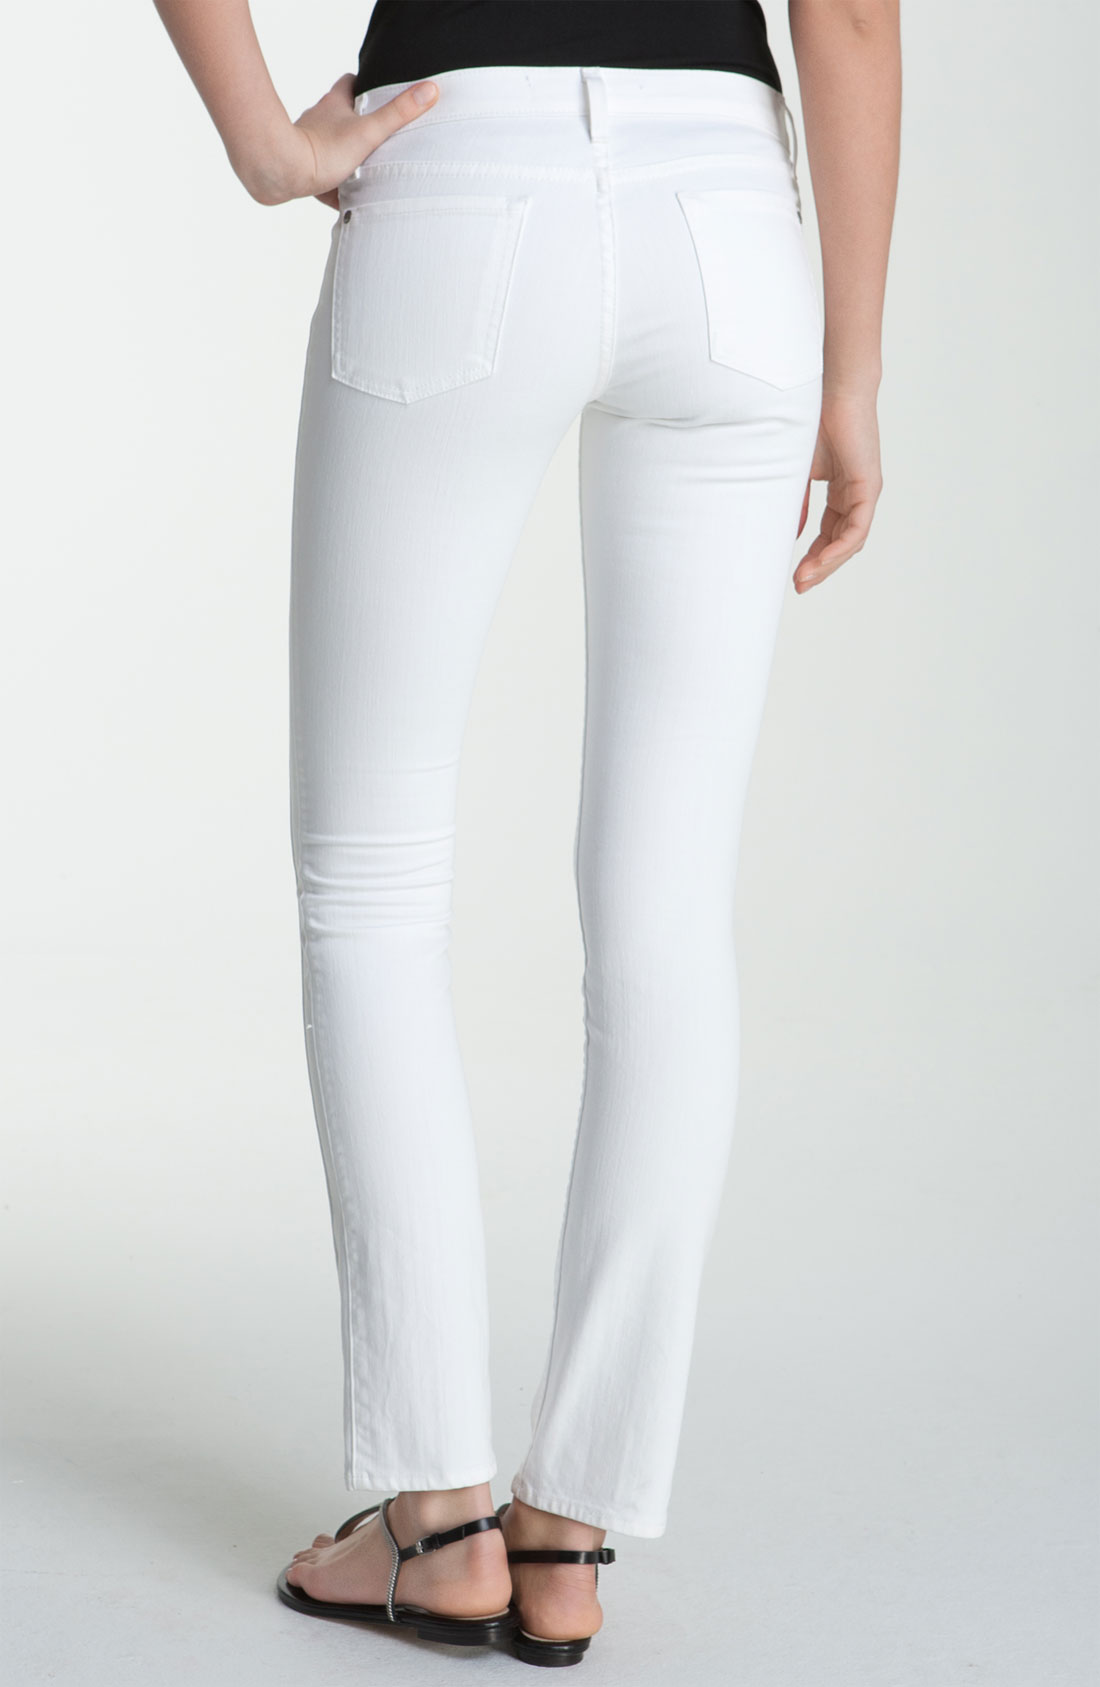 Vince Slim Straight Leg Stretch Jeans in White | Lyst